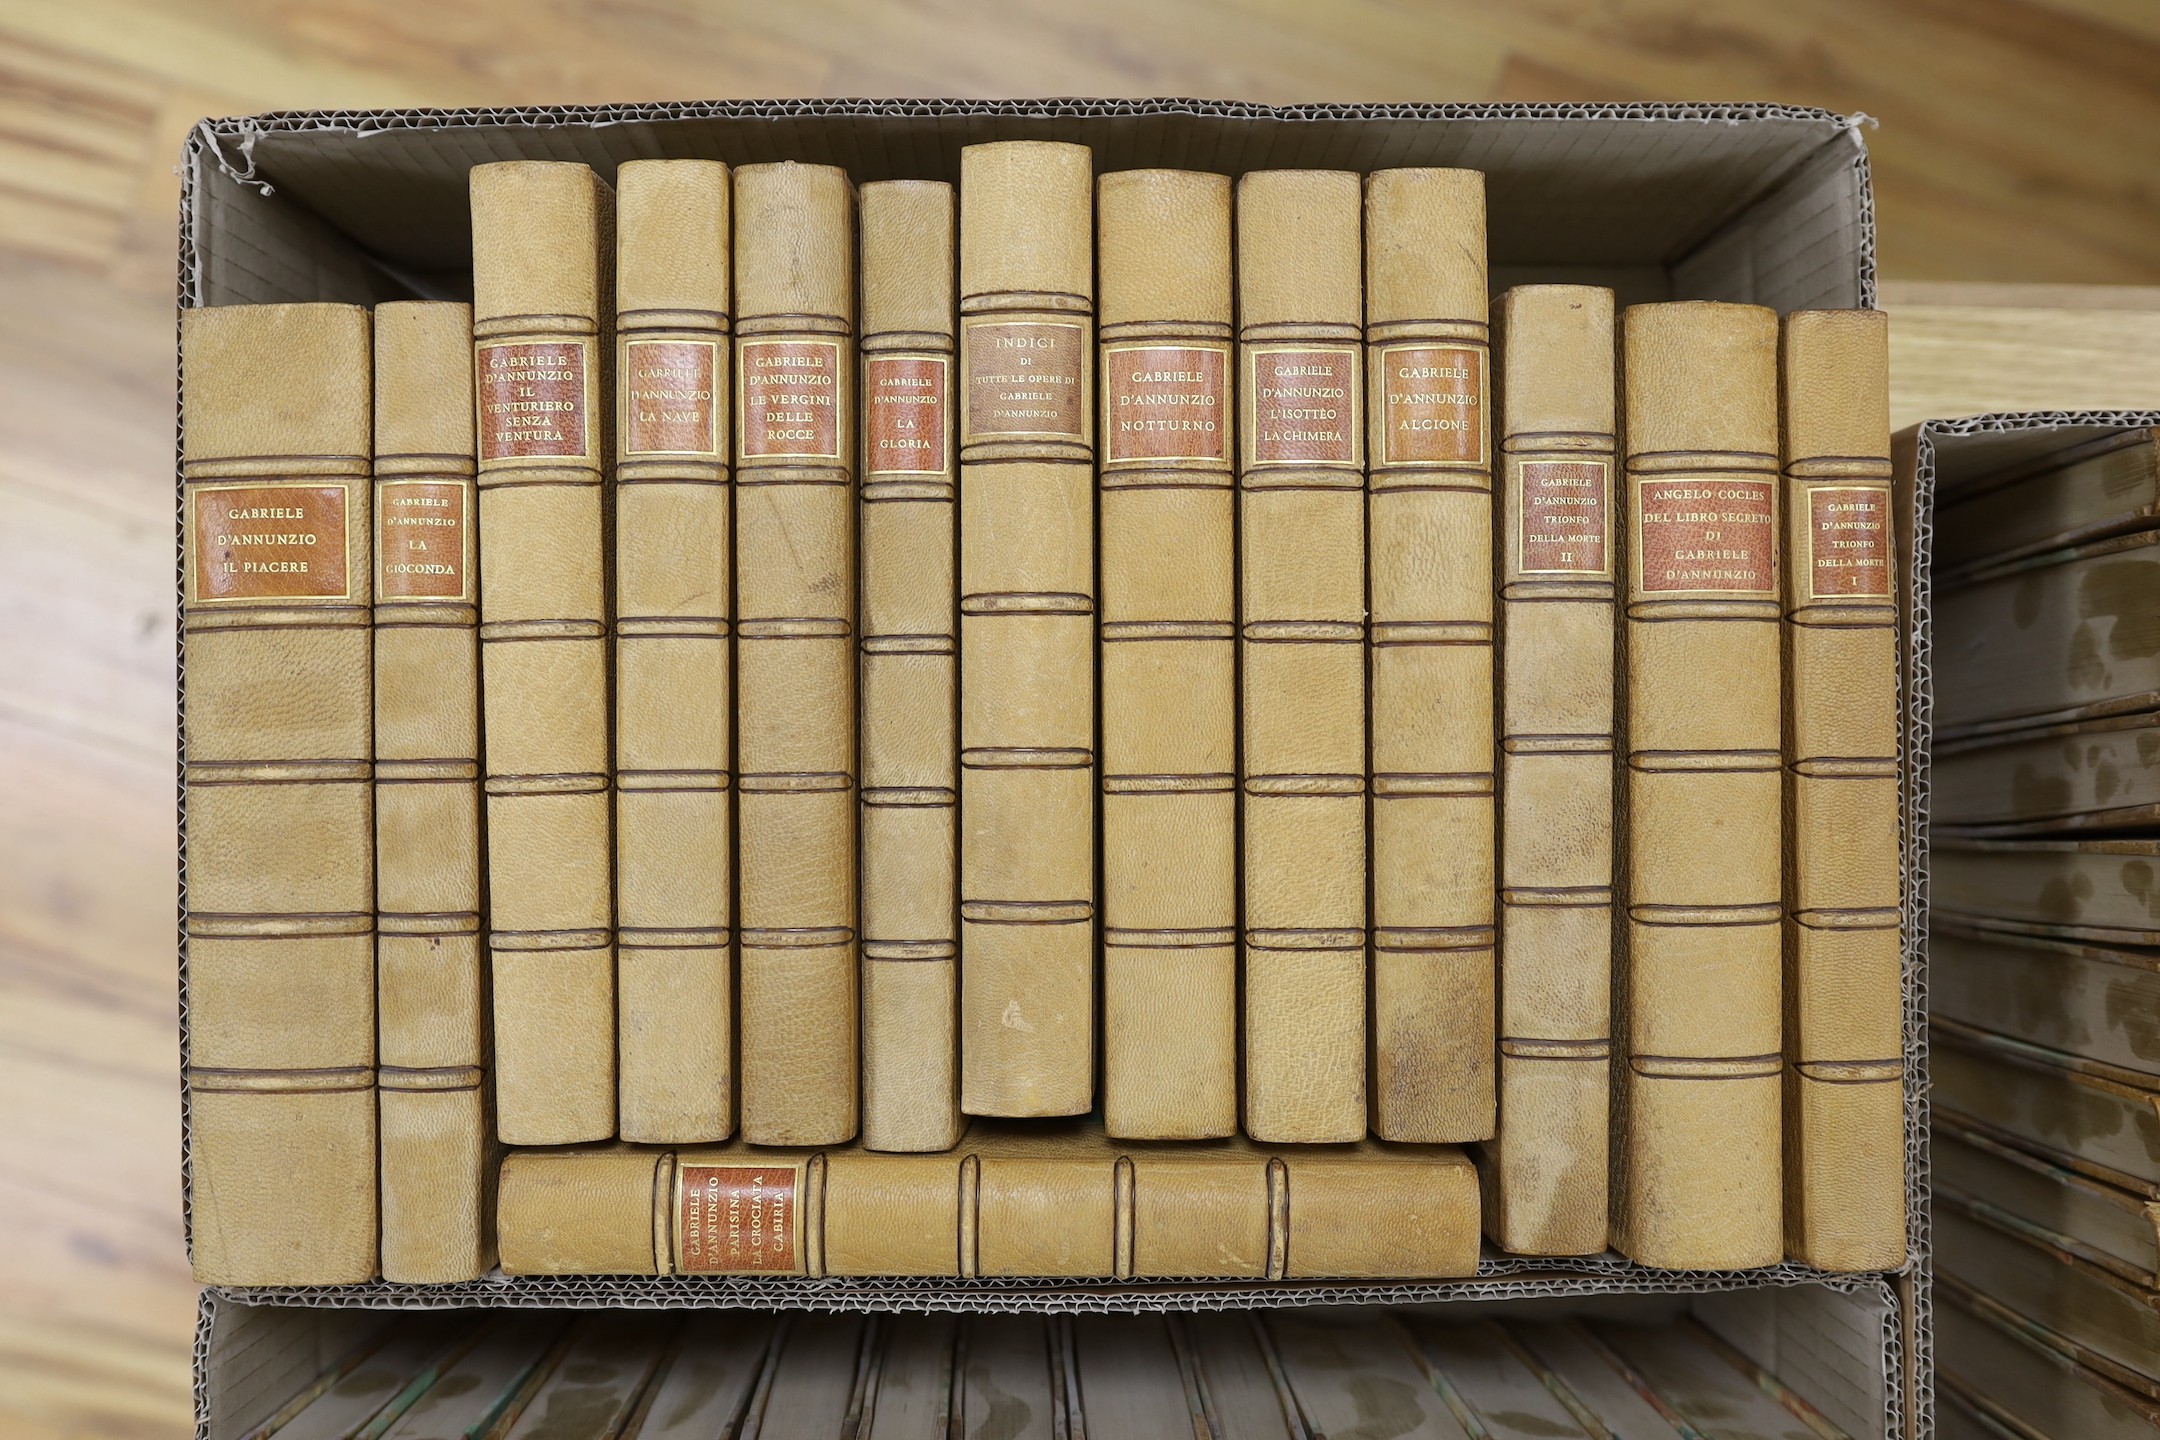 D'Annunzio, Gabriele - (Collected Writings, Instituto Nazionale Edition). 40 vols. photo plates and facsimiles; publisher's tan half morocco and marbled boards, panelled spines with red labels, gilt tops, partly unopened